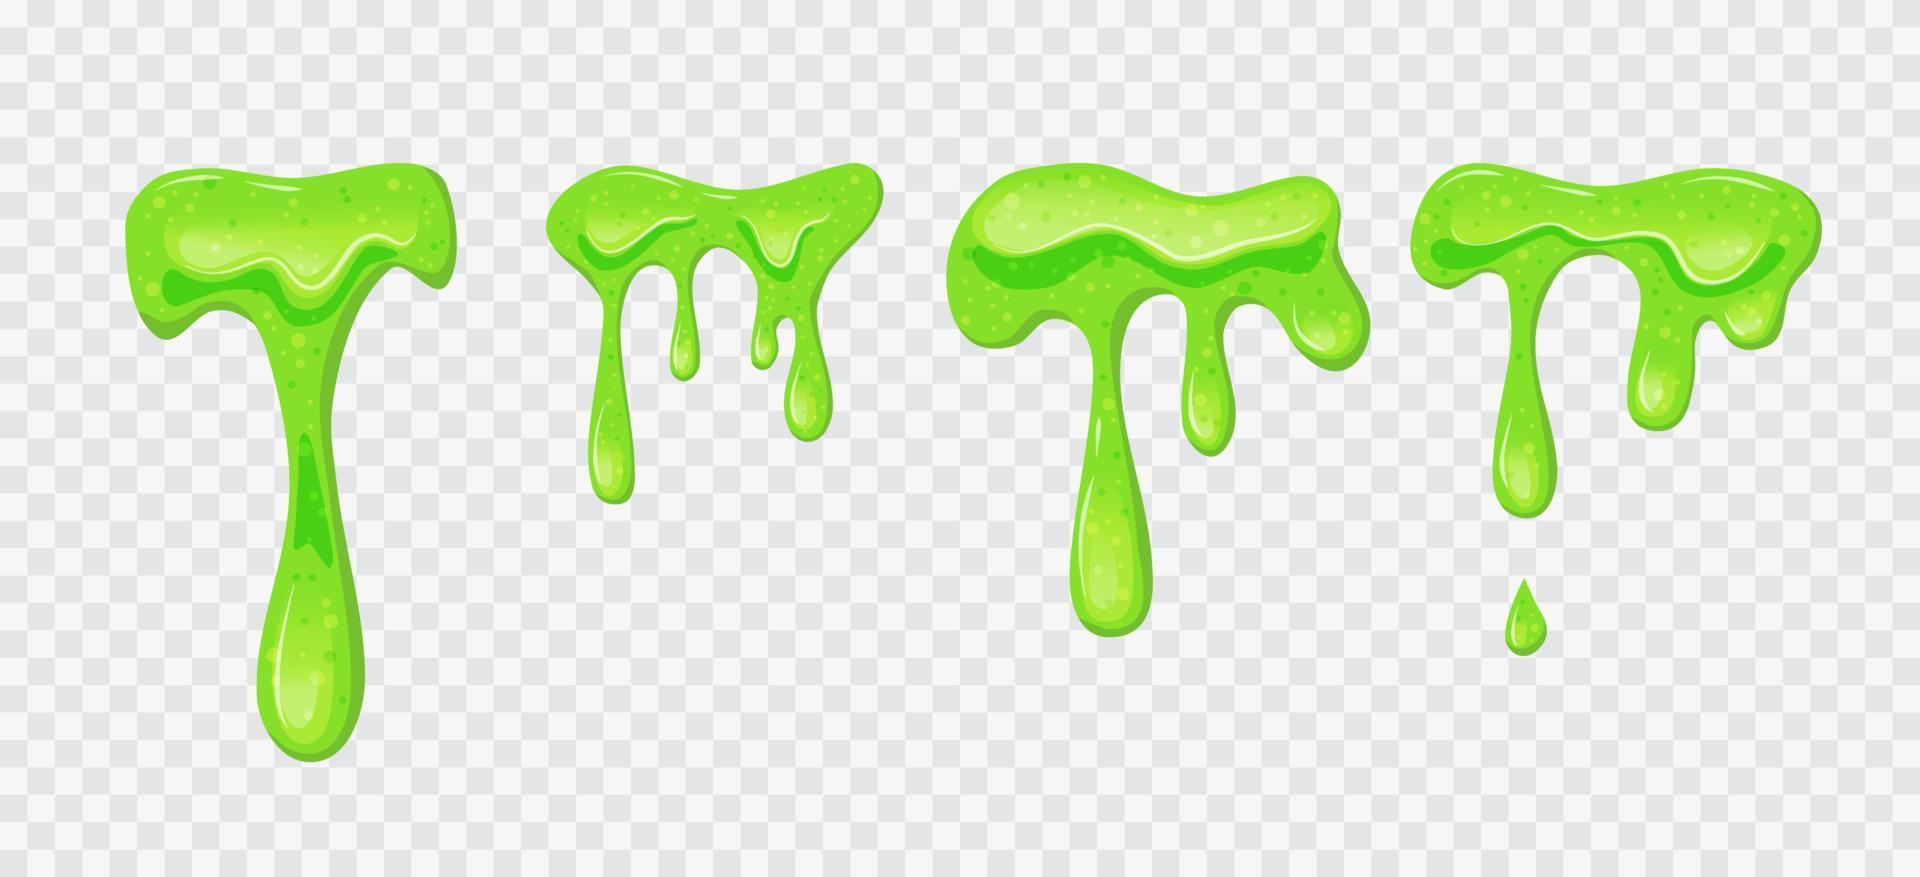 https://static.vecteezy.com/system/resources/previews/007/744/130/non_2x/green-sticky-liquid-shiny-dripping-slime-set-transparent-background-cartoon-illustration-vector.jpg